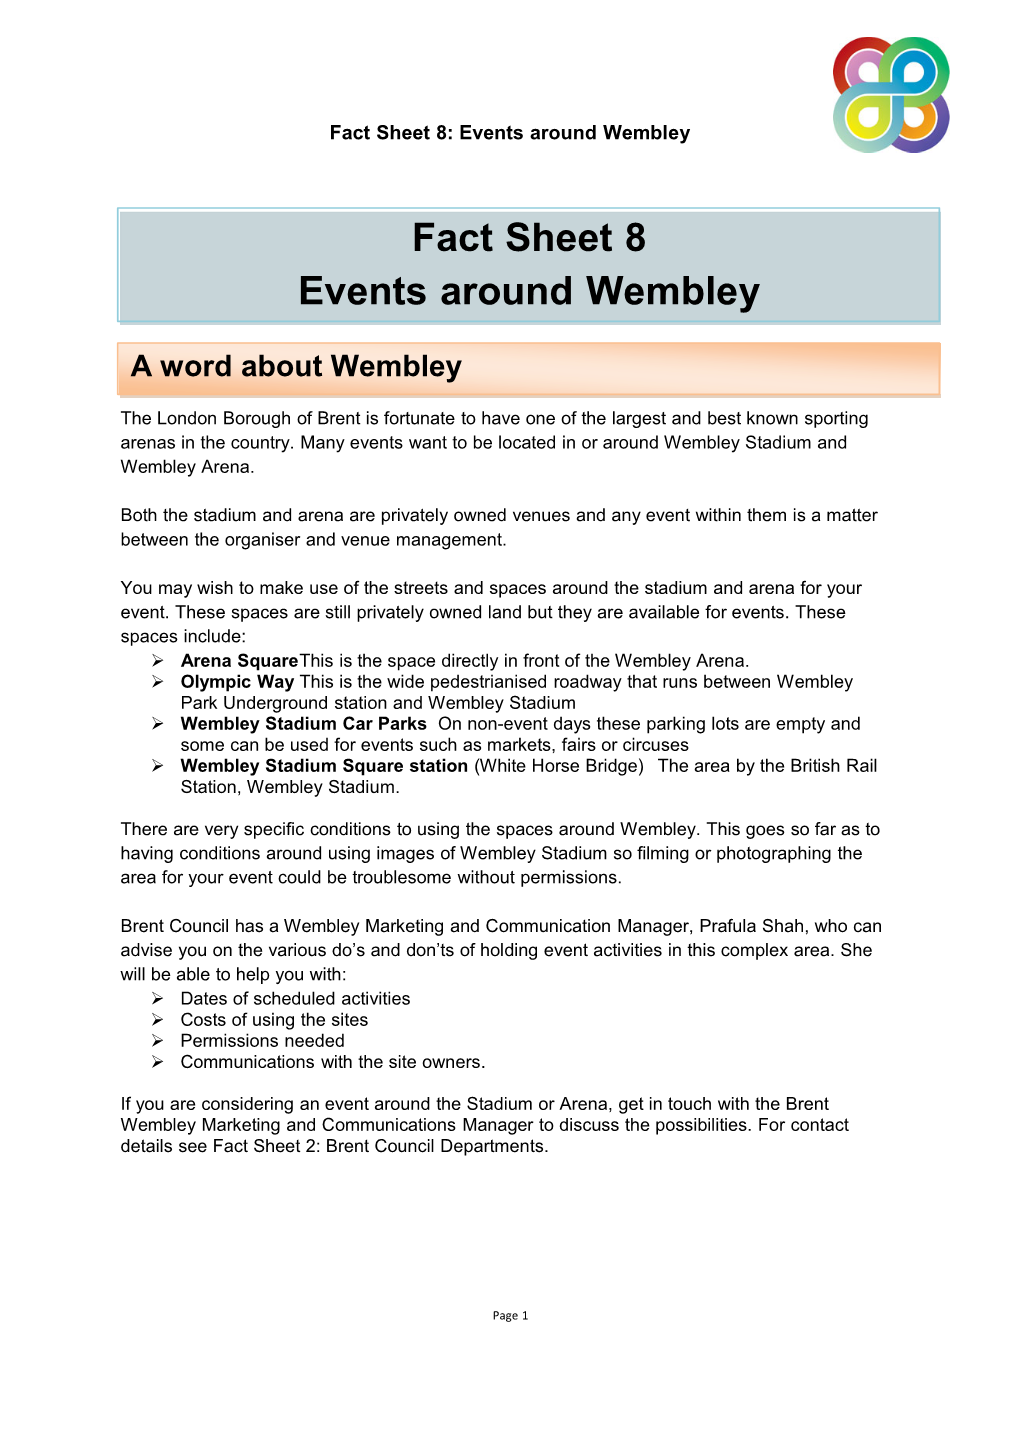 Fact Sheet 8 Events Around Wembley